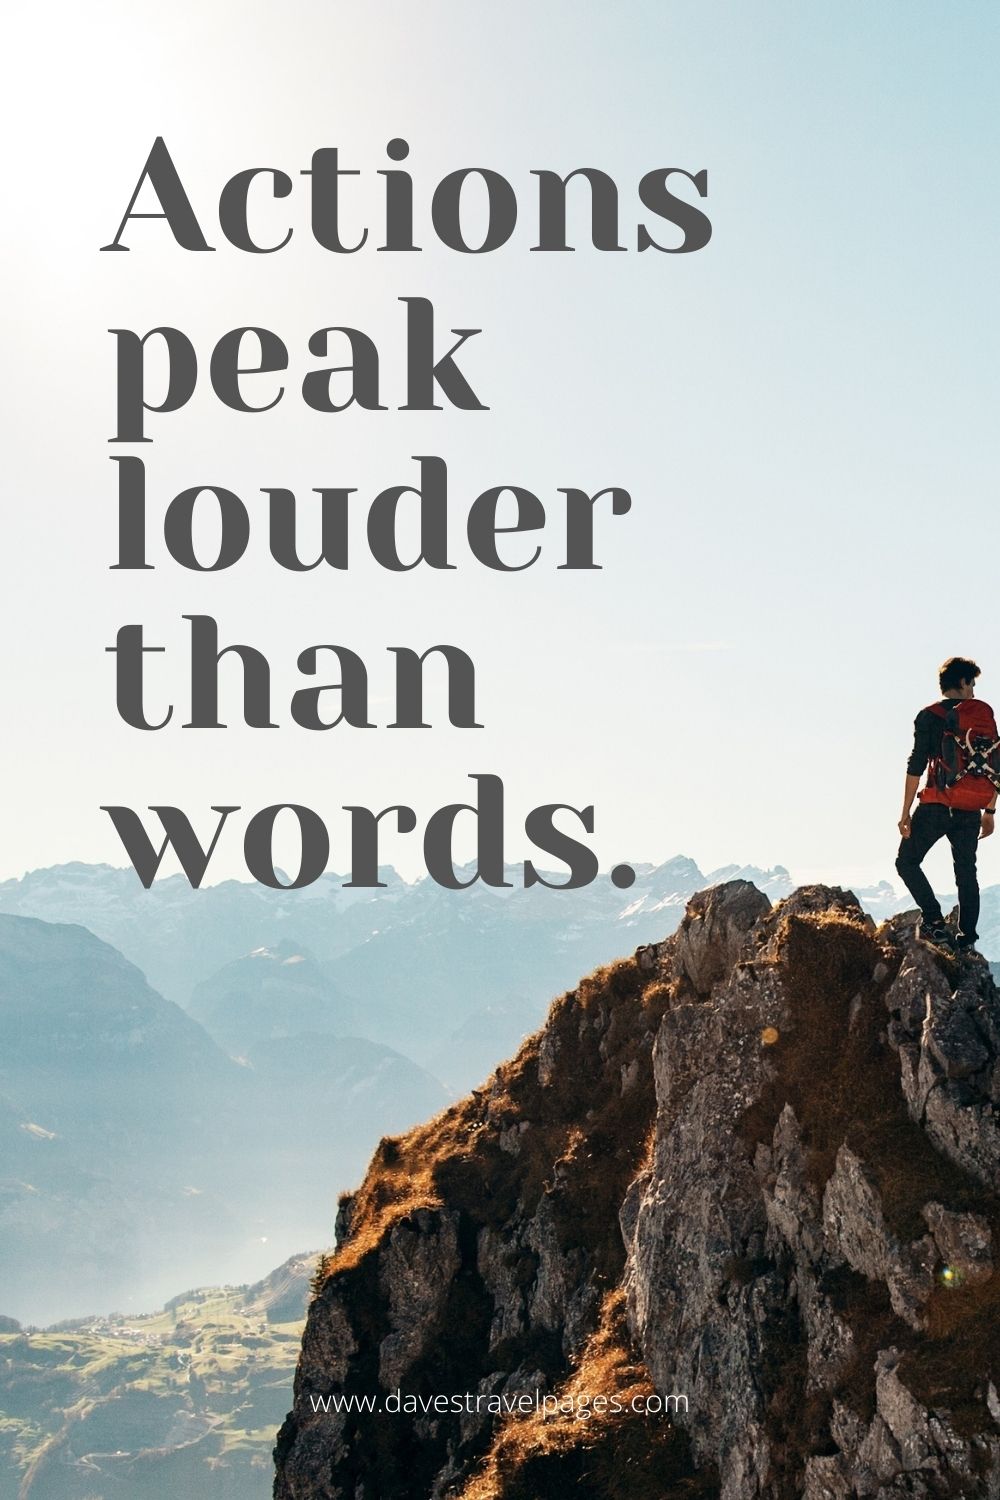 Actions peak louder than words mountain captions